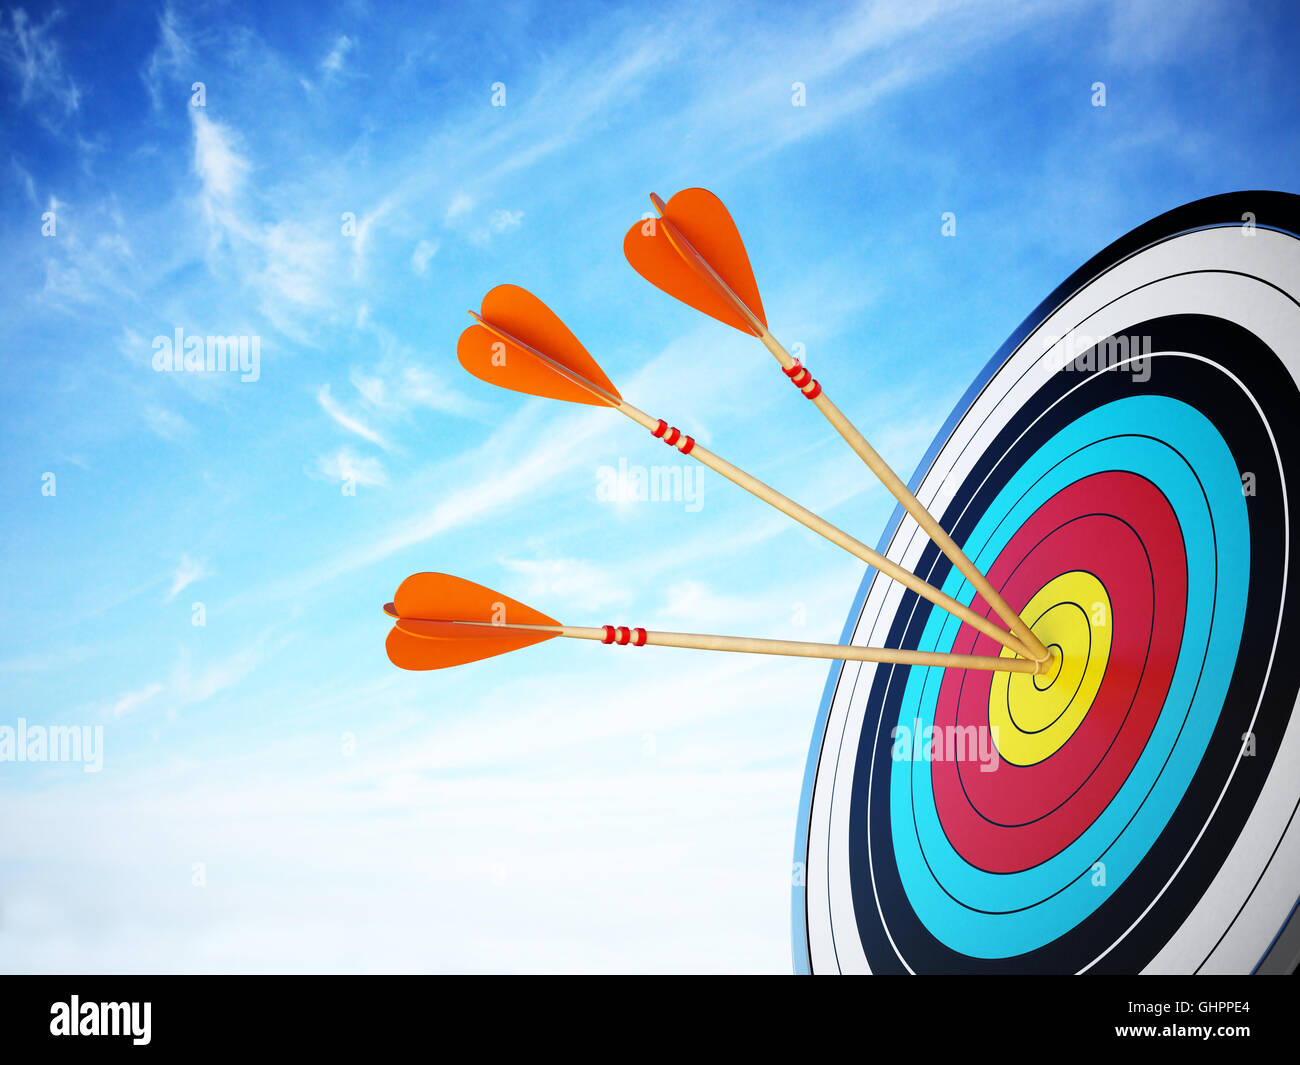 The Word Action As A 3D Illustration With An Arrow Hitting A Target  Bullseye In The Letter O, Representing Urgency Or An Emergency Need To Act  Now To Solve A Problem Or